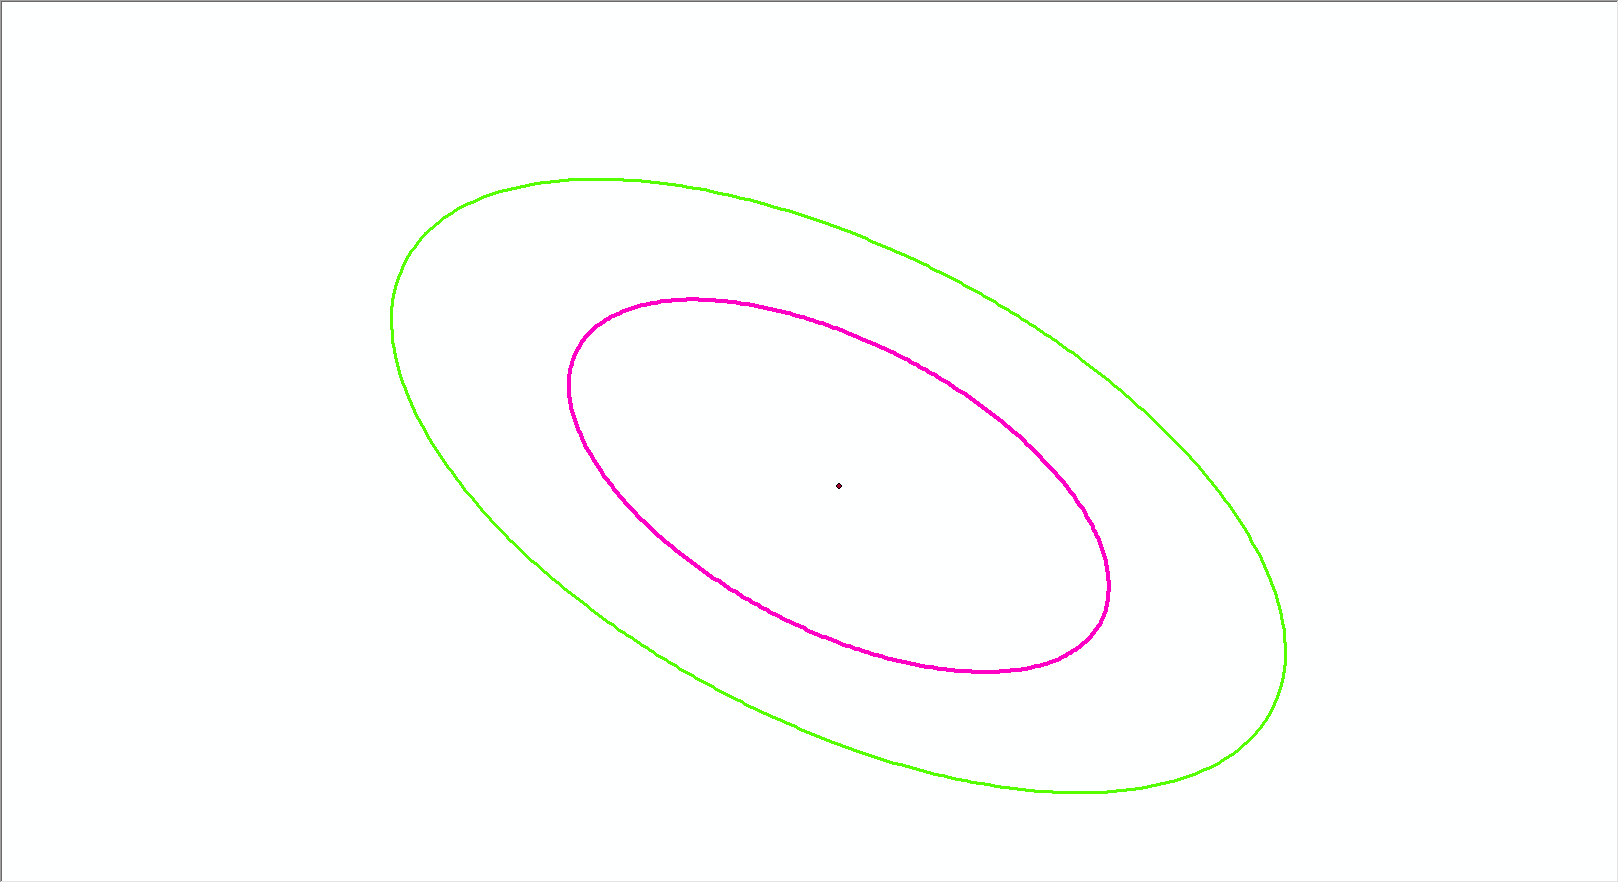 Pink is Ellipse done in ArcMap using table to ellipse and the Green is GEP Ellipse Processor